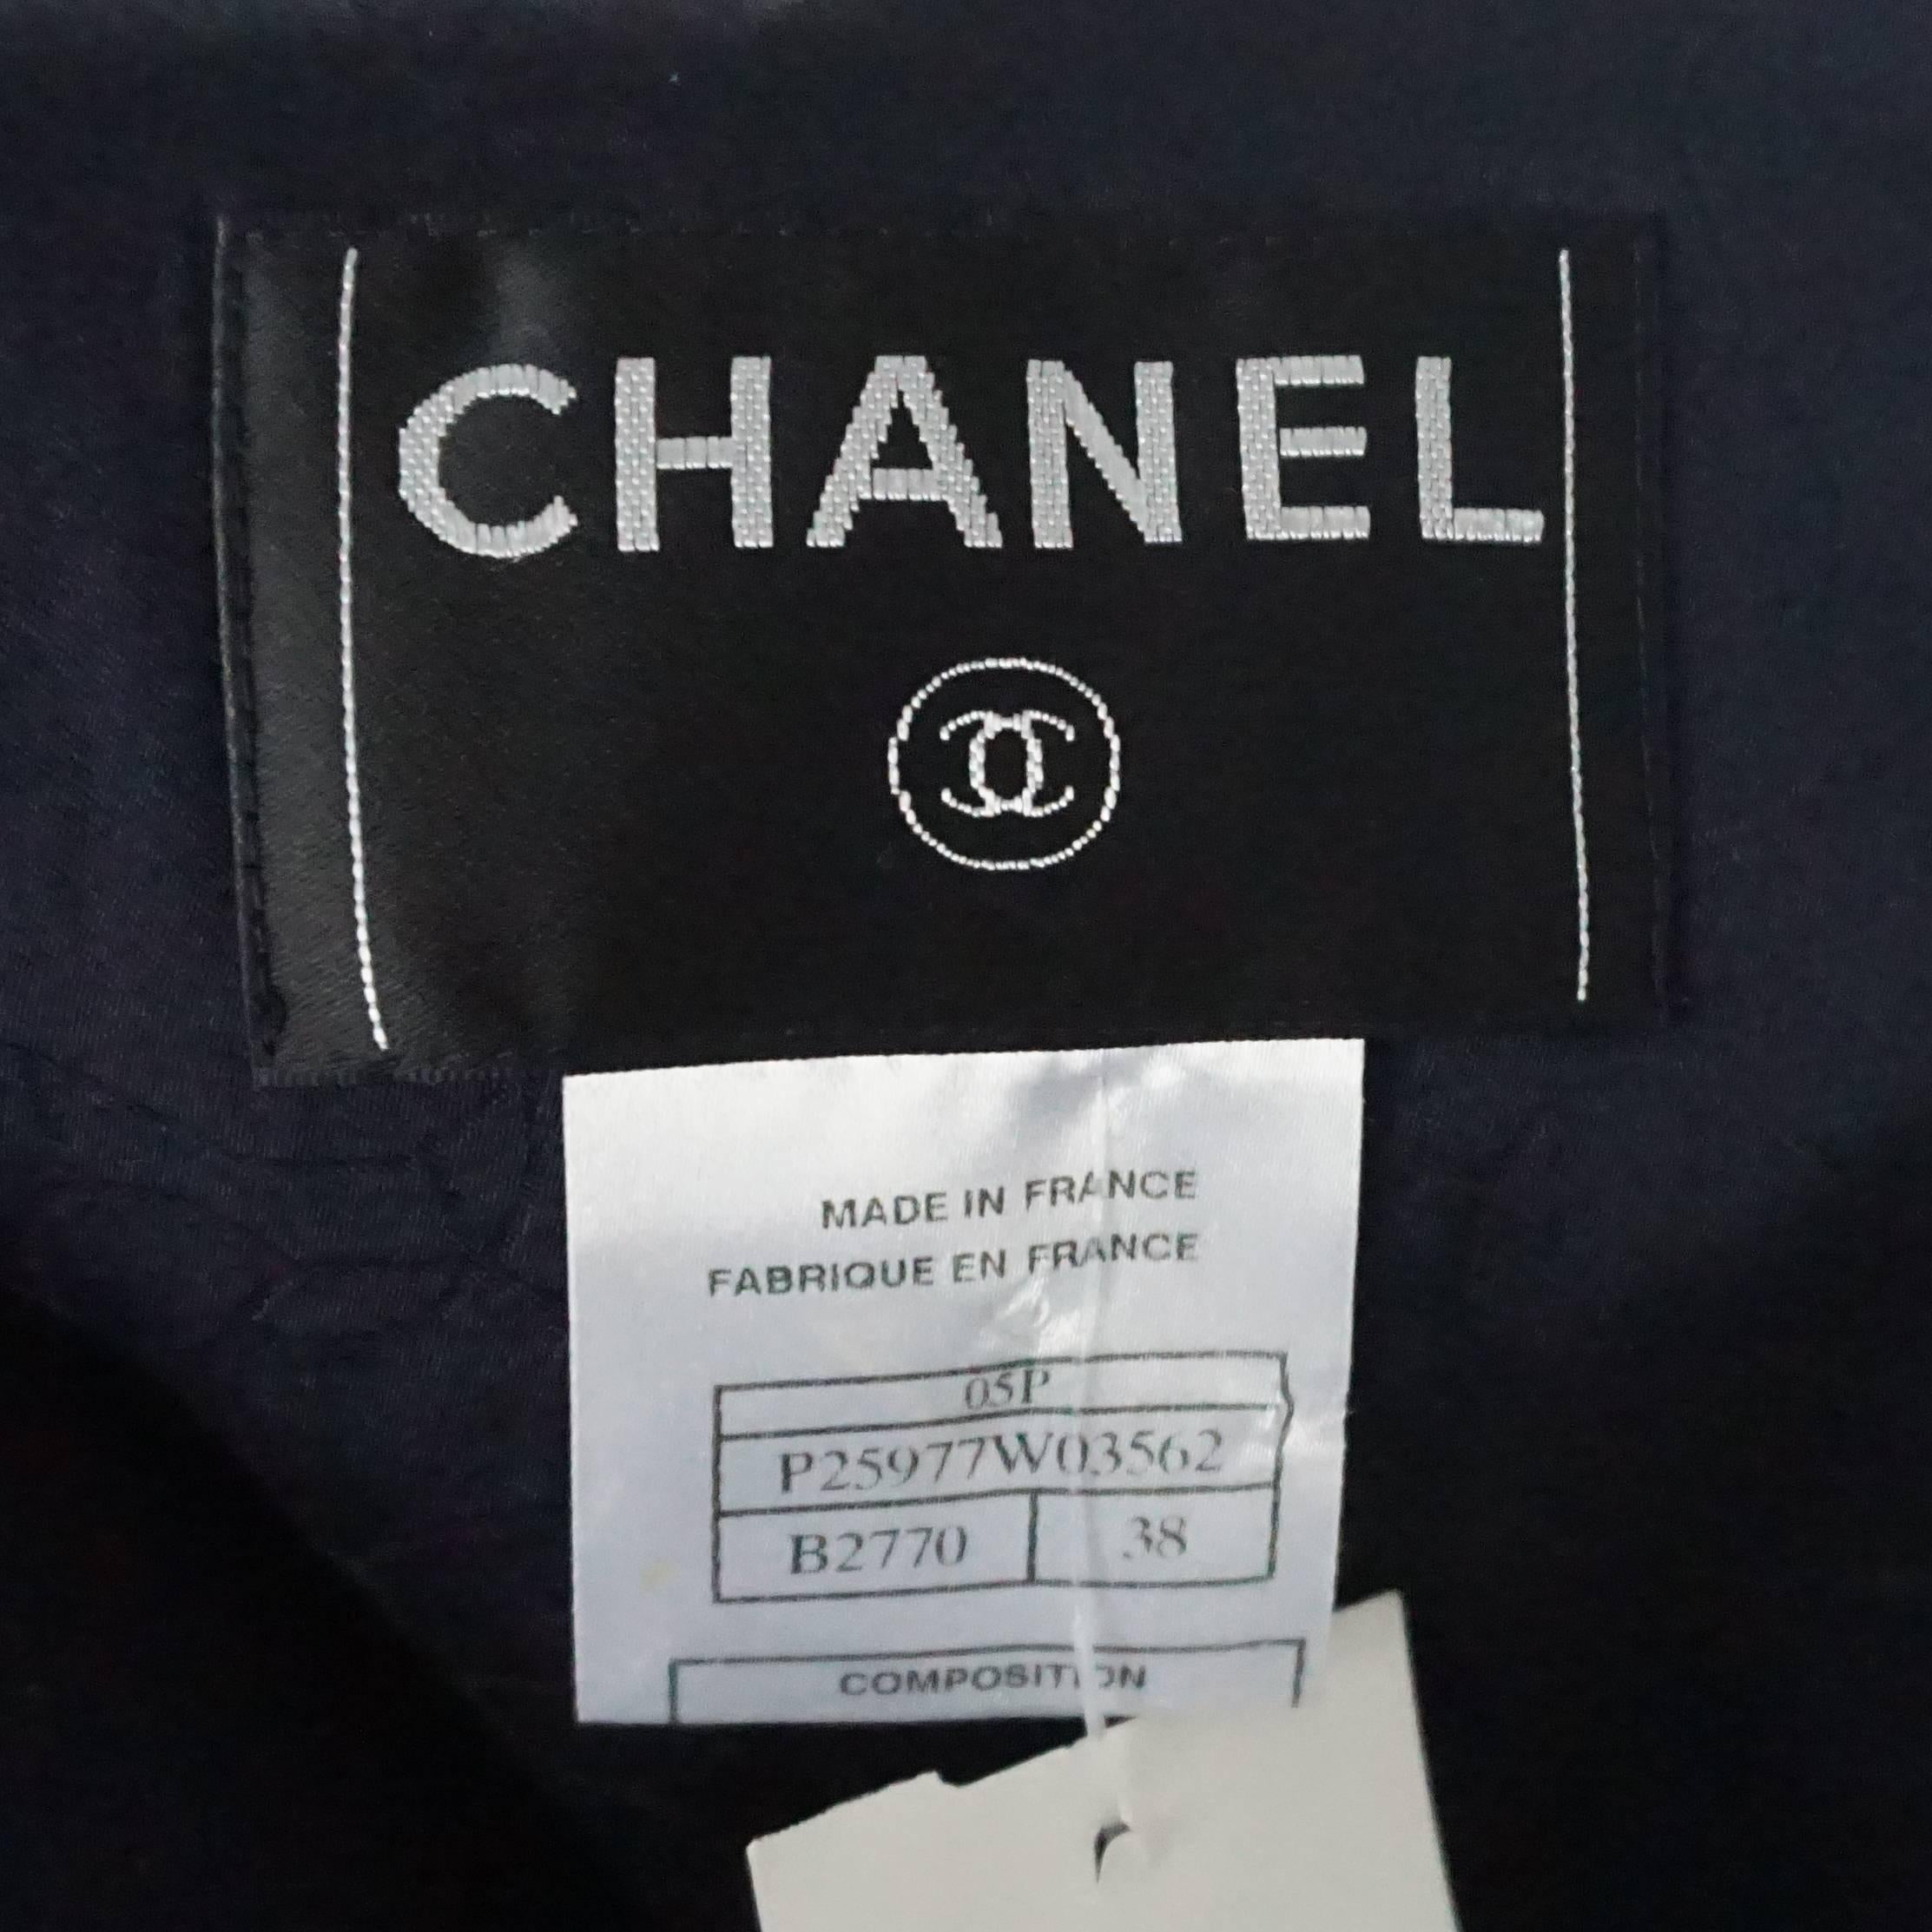 Chanel Navy and Light Blue Tweed Jacket with Plunging Neck - 38 For ...